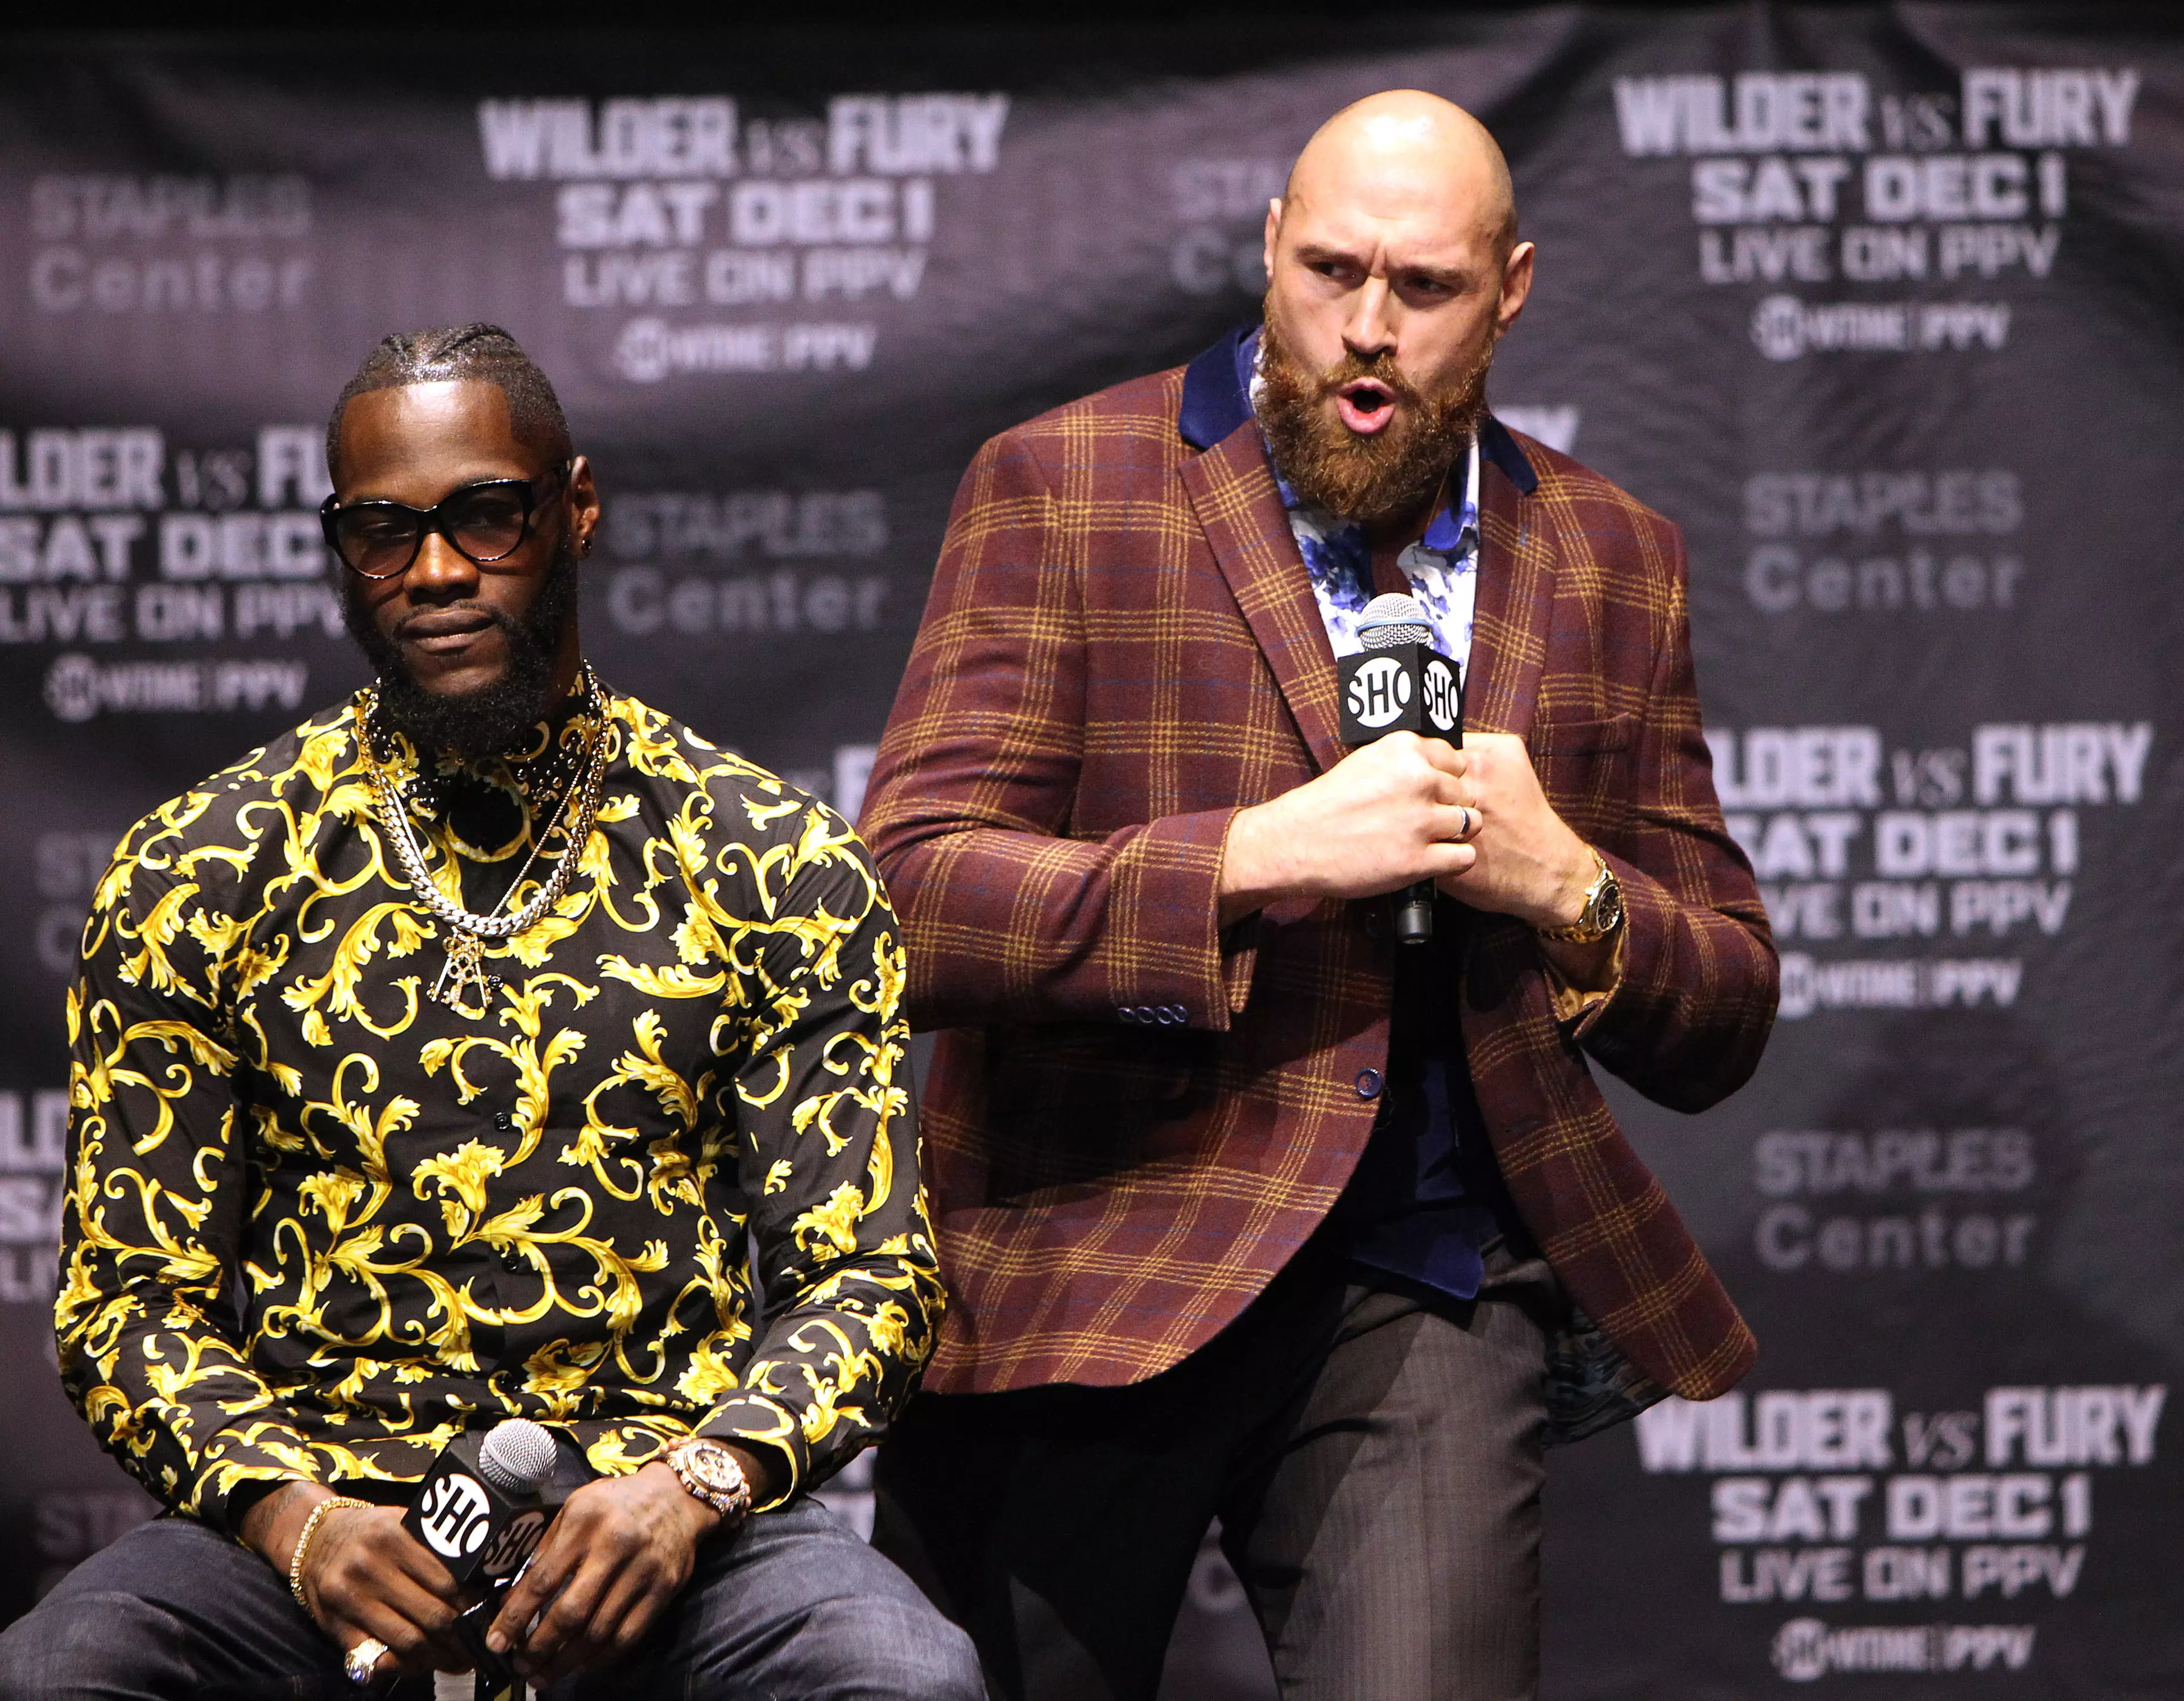 Wilder and Fury have swapped insults at several press conferences. Image: PA Images